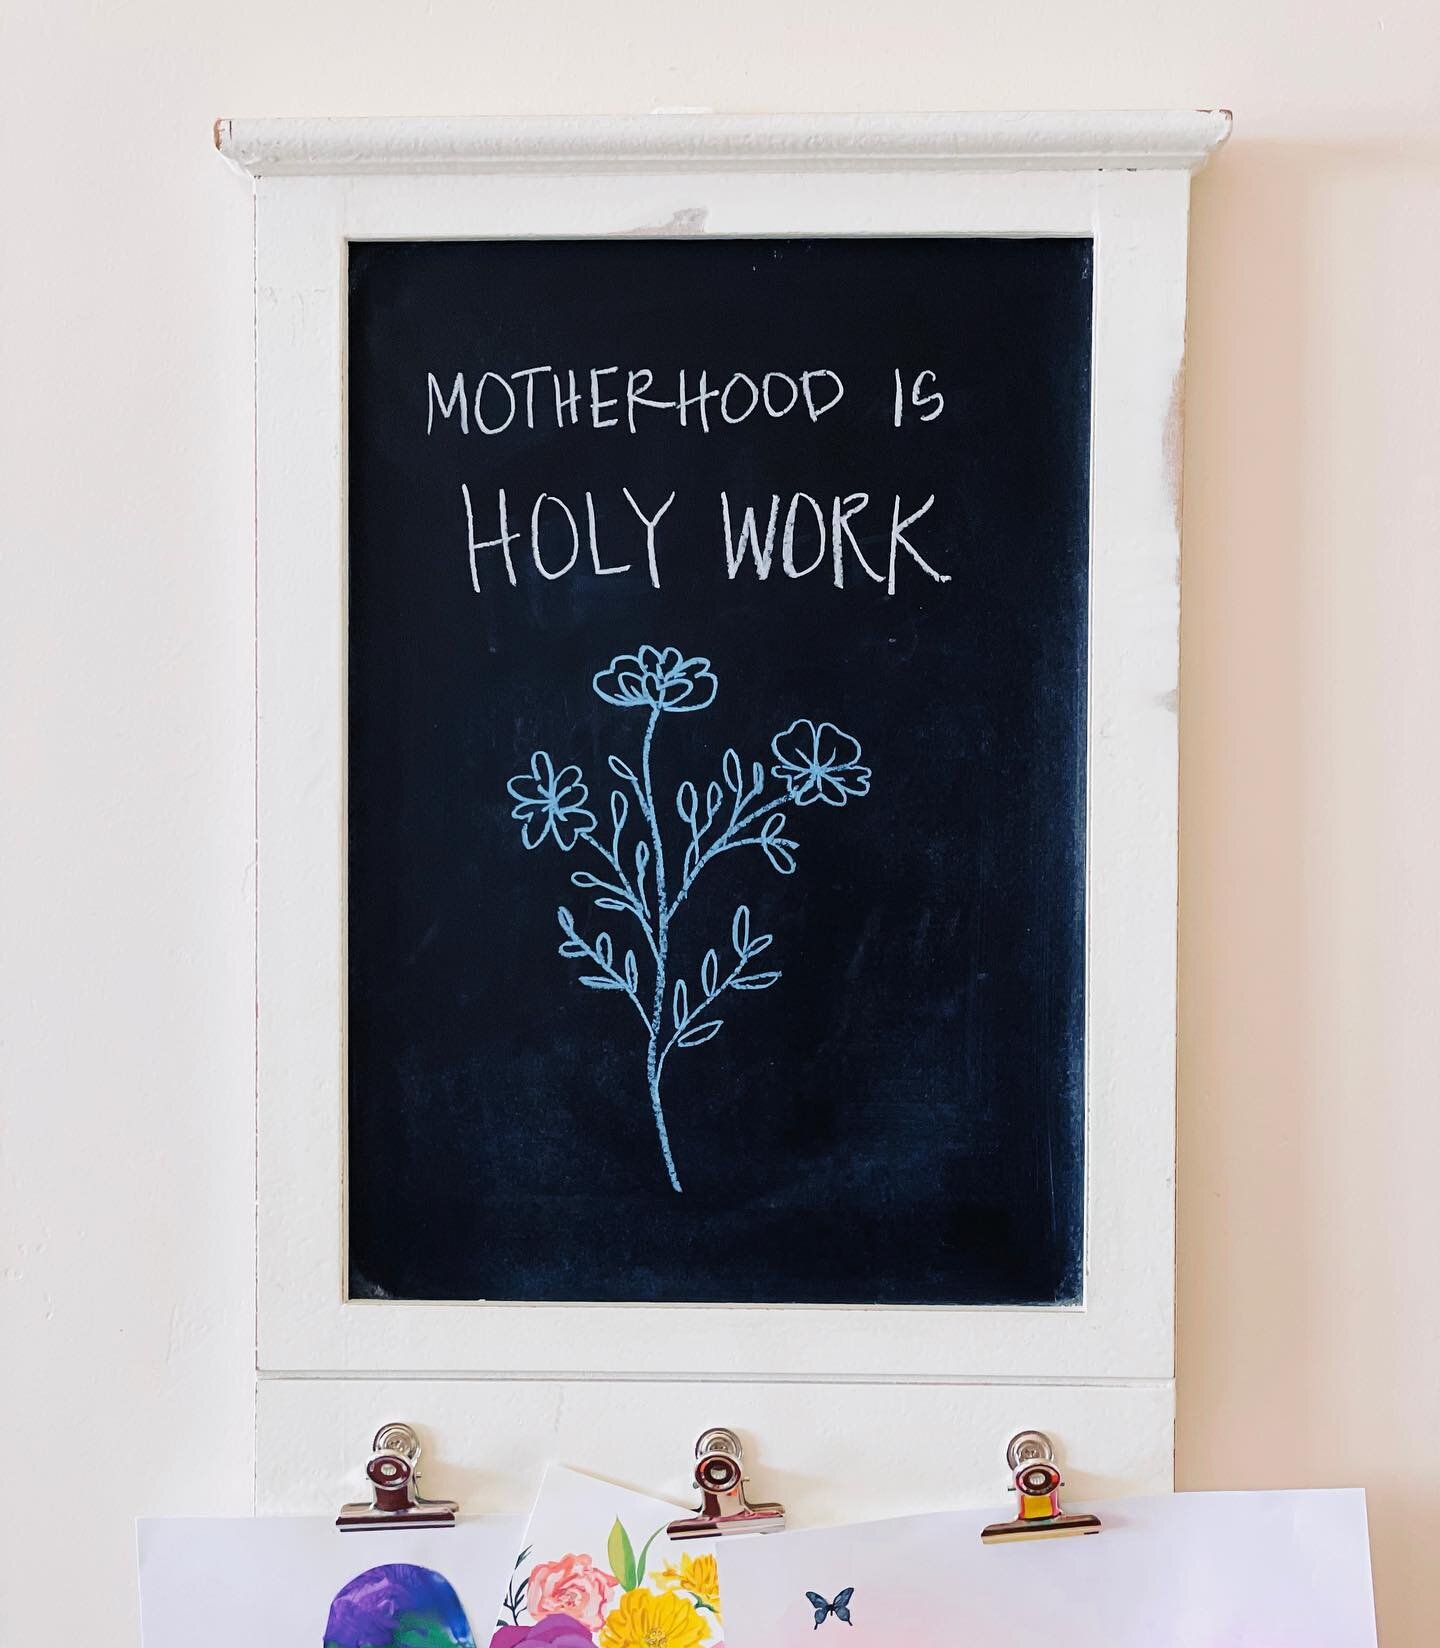 My favorite mother-creatives over at @coffeeandcrumbs constantly remind me of this beautiful truth: motherhood is holy work. 

We give of ourselves &mdash;our bodies, our minds, our hearts and souls&mdash; over and over again, every day for our child